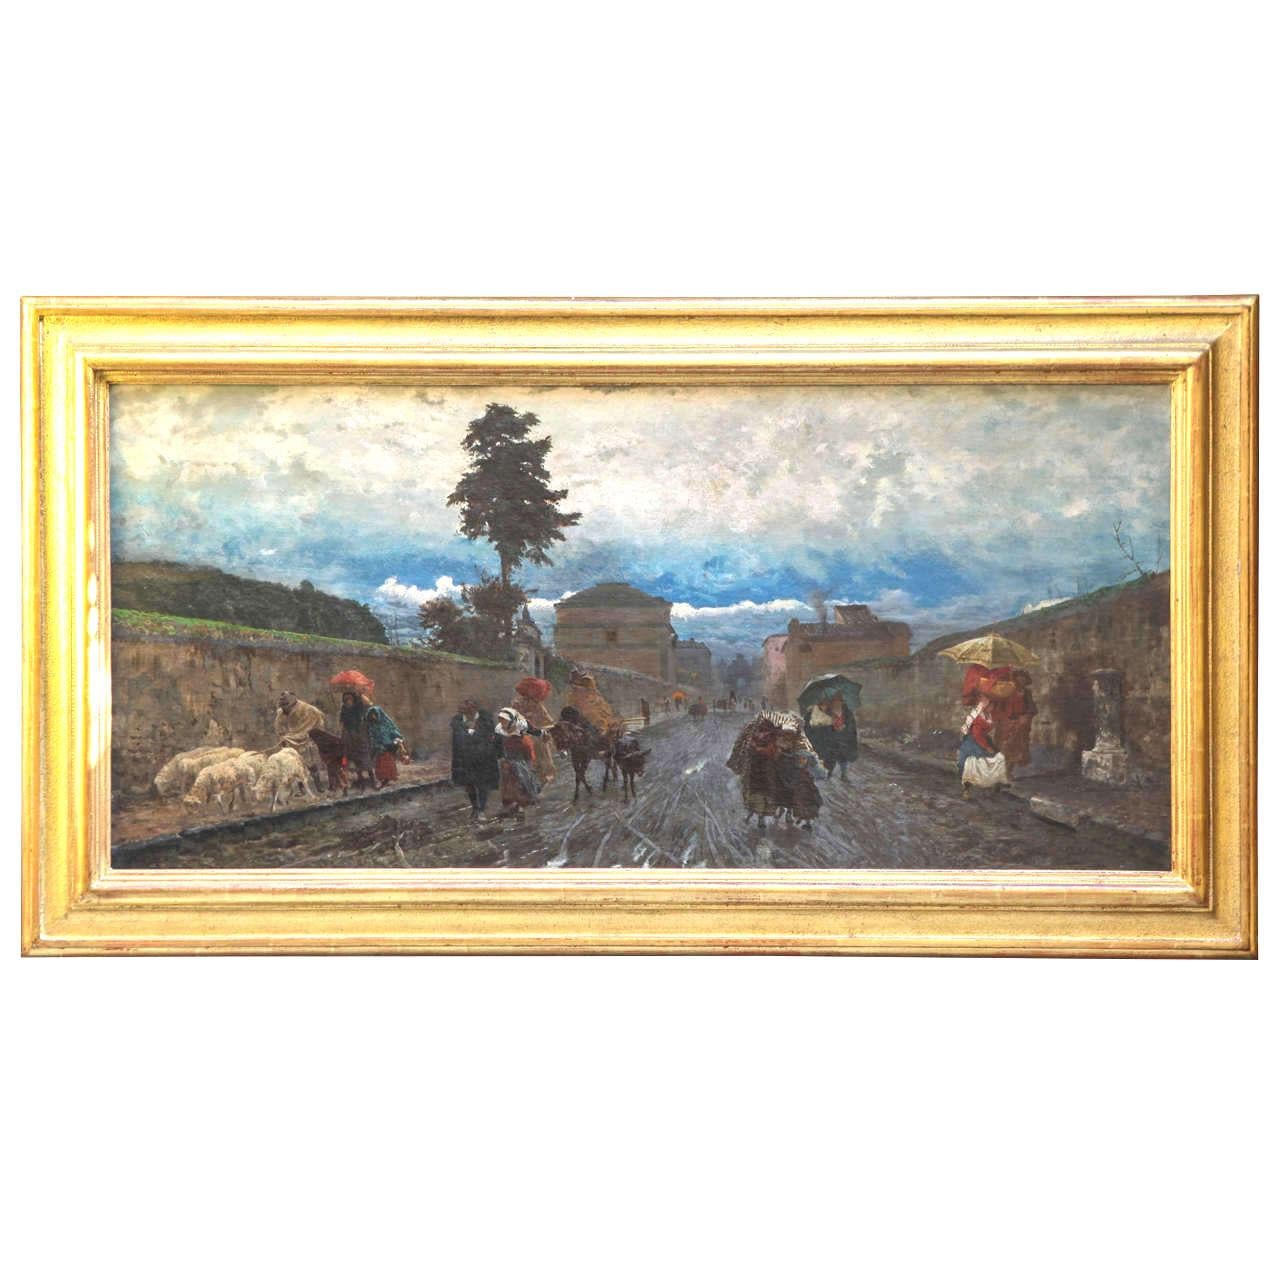 Oil painting Otter On the Road carriage Hand painted Thomas Proudly American 